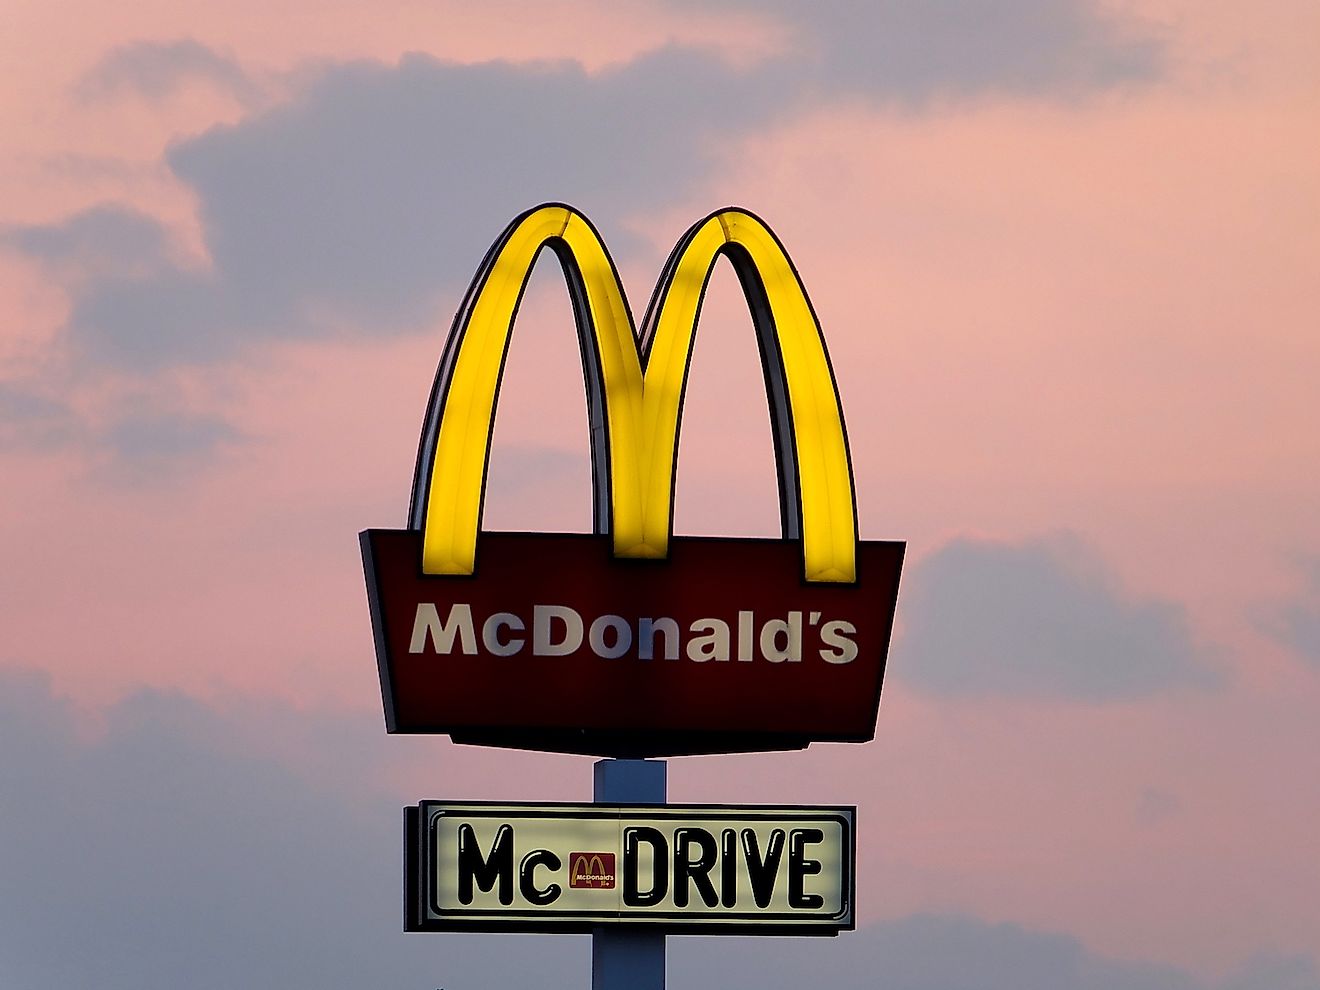 Neon of Mc Donald's in Szczecin, Poland. Mc Donald's is the largest and the most popular restaurant chain in Poland. Image credit:  siekierski.photo/Shutterstock.com